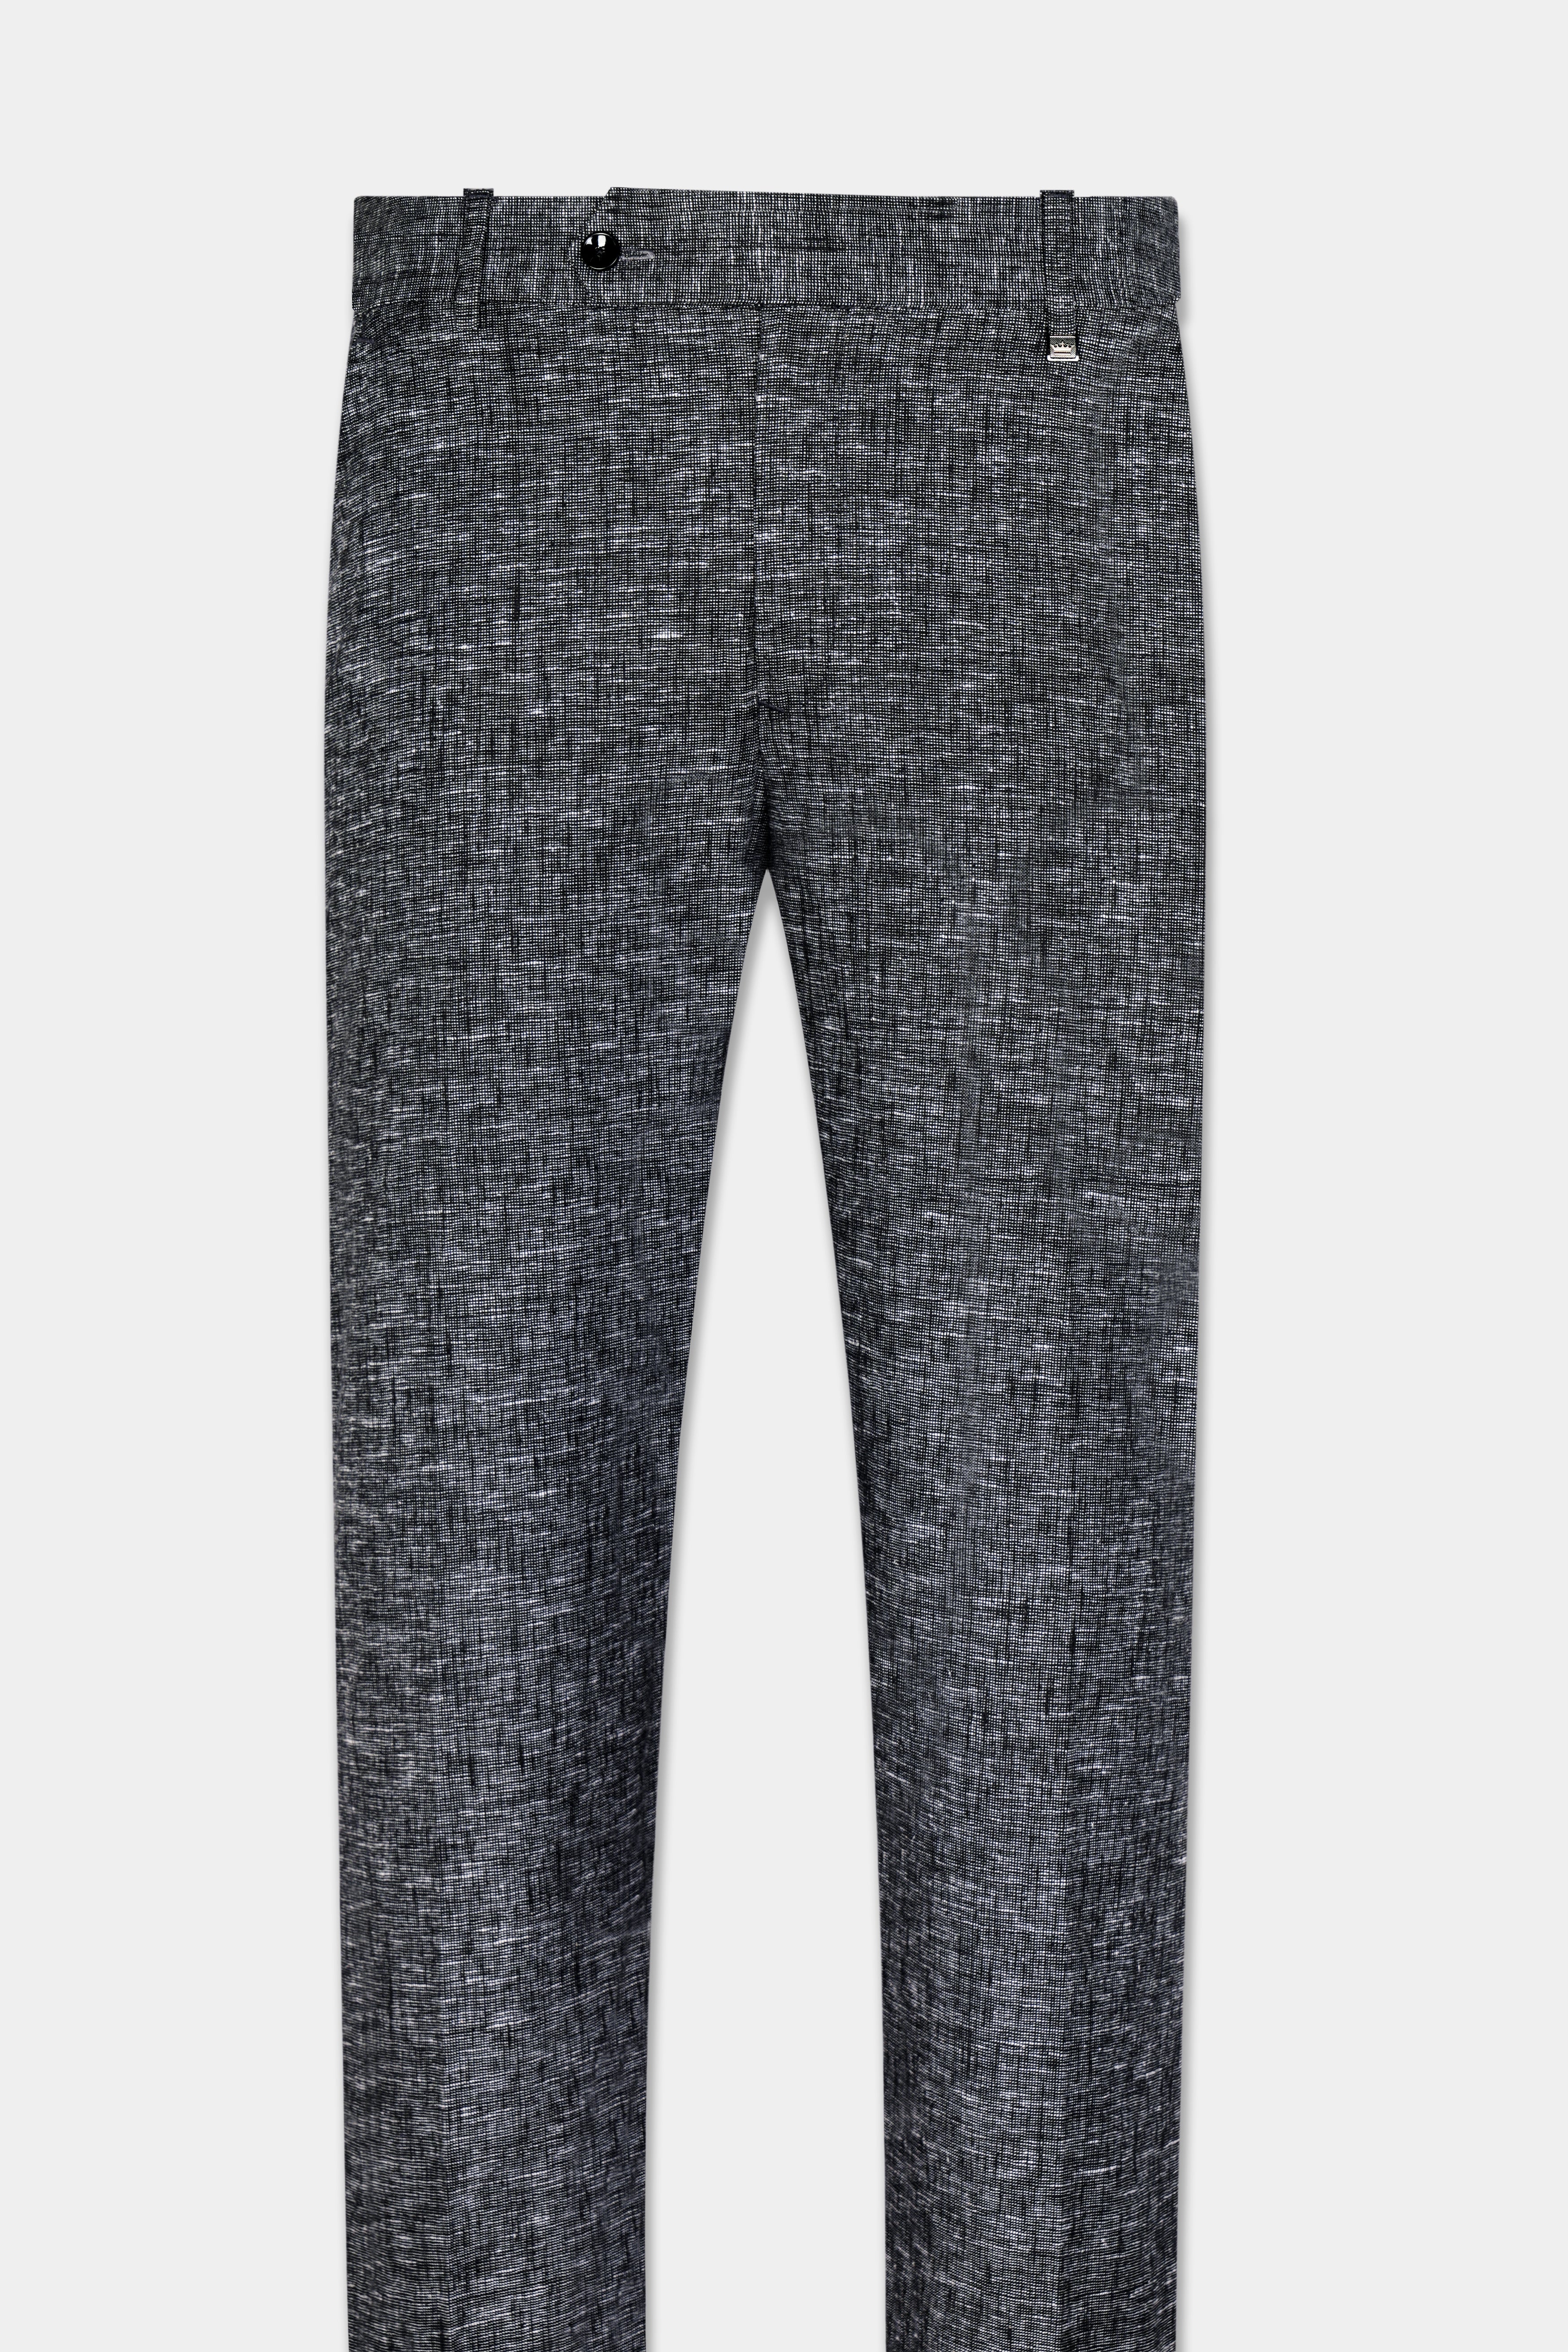 Arsenic Gray Luxurious Linen Pant T2922-SW-28, T2922-SW-30, T2922-SW-32, T2922-SW-34, T2922-SW-36, T2922-SW-38, T2922-SW-40, T2922-SW-42, T2922-SW-44